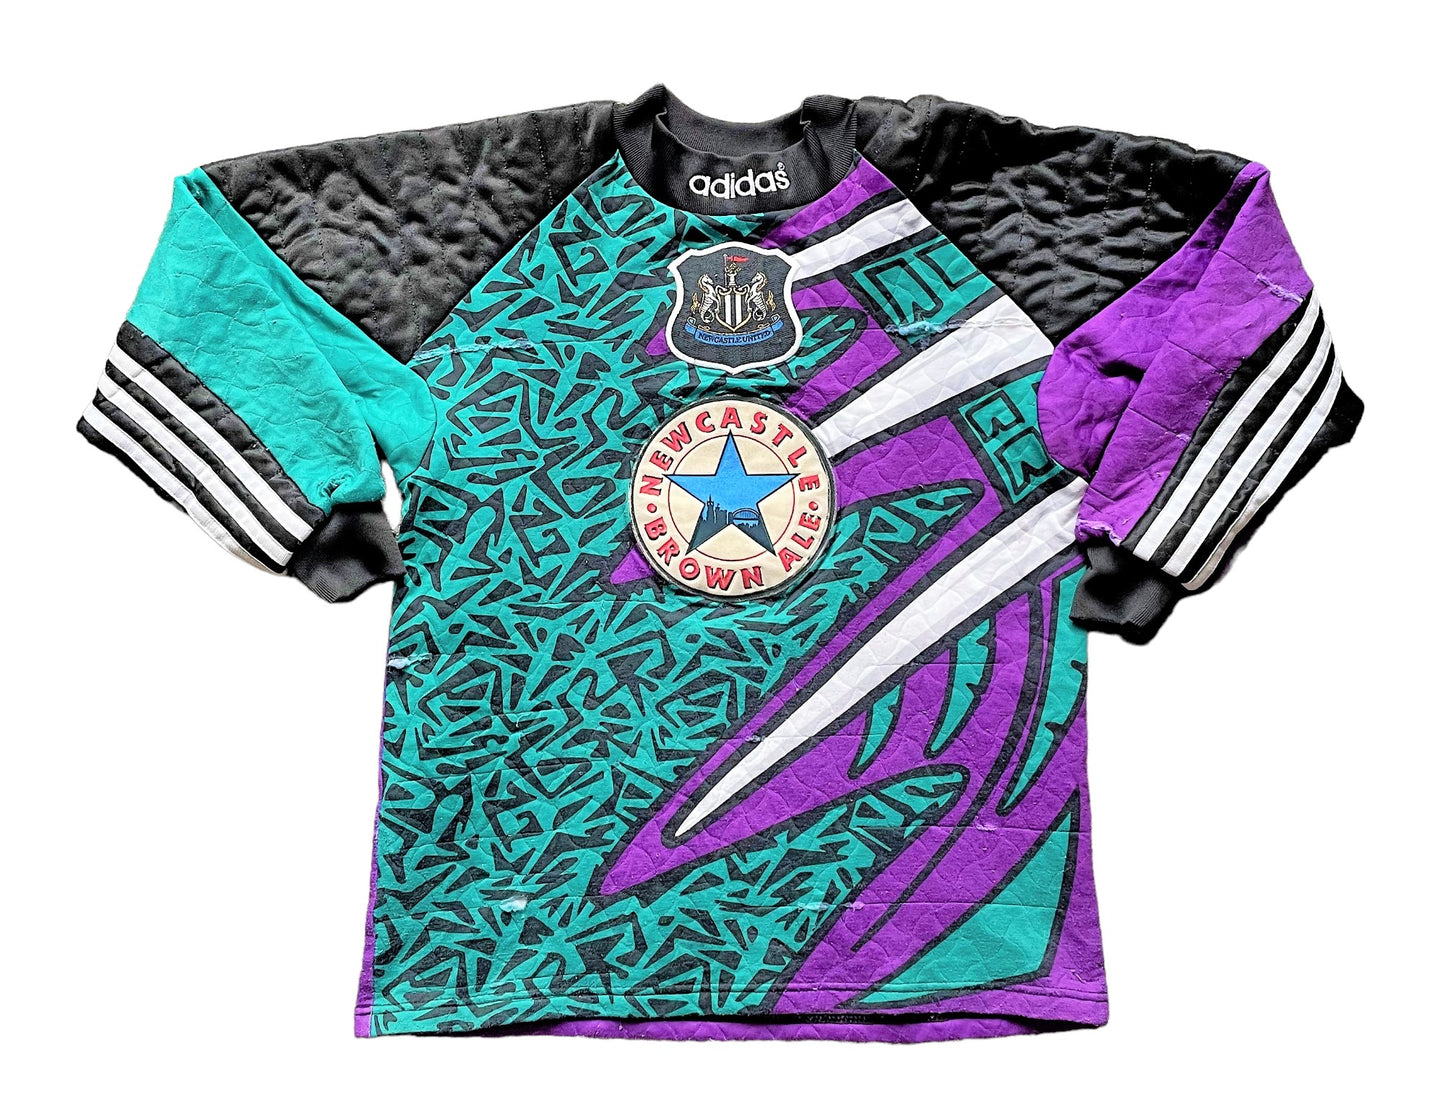 Newcastle Goalkeeper Shirt 1995-96 (poor) Adults XSmall. Height 22 inches